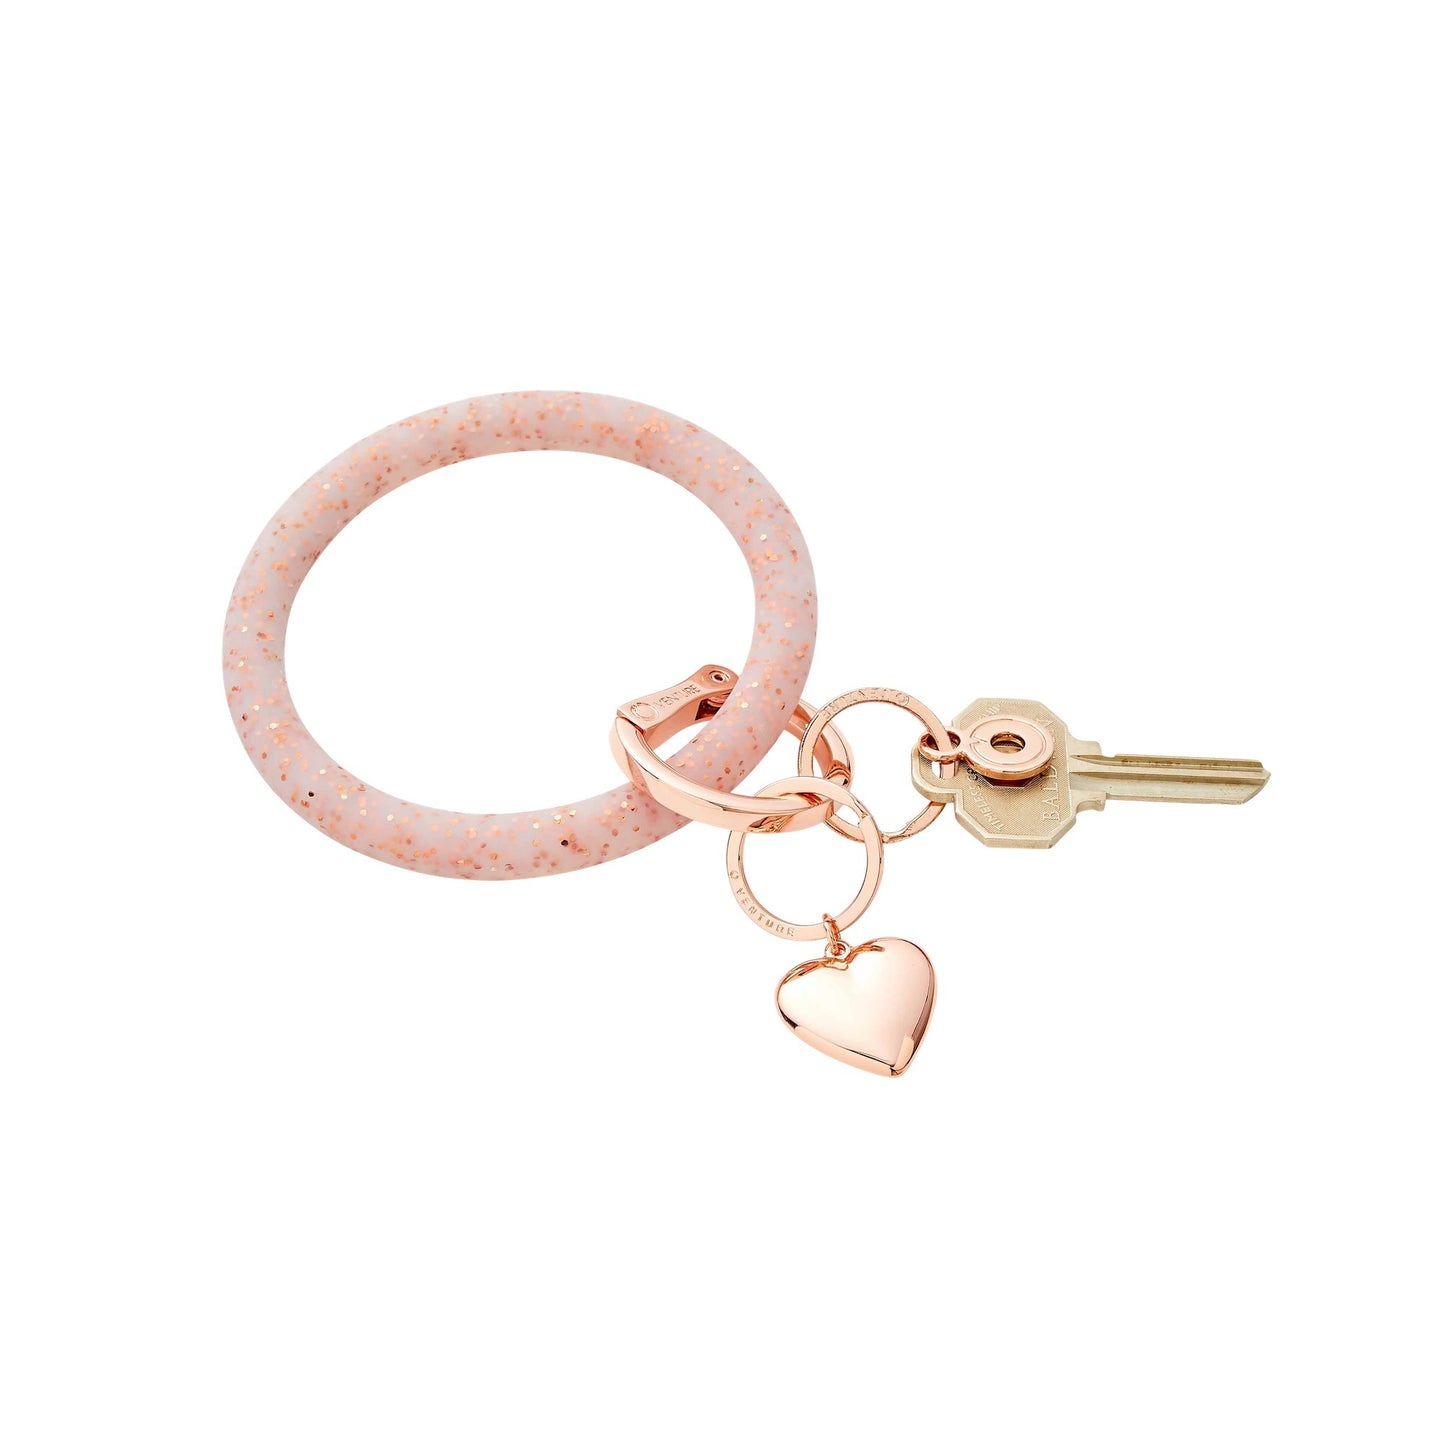 Rose gold puffy heart key chain. This charm can be added to the big o key ring in rose gold